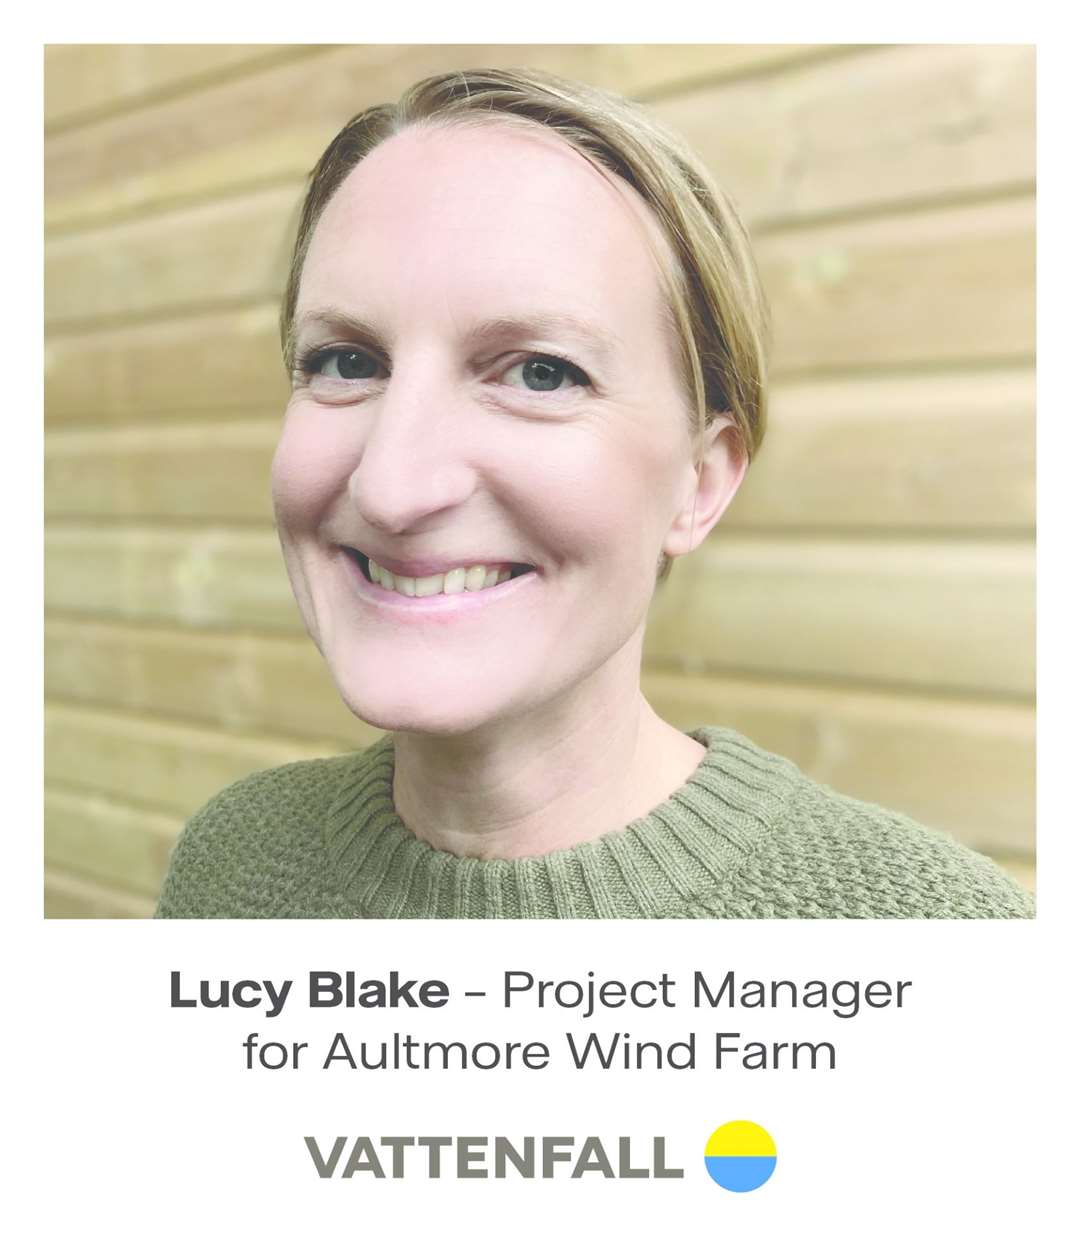 Lucy Blake, project manager for sponsor Vattenfall’s Aultmore Wind Farm.